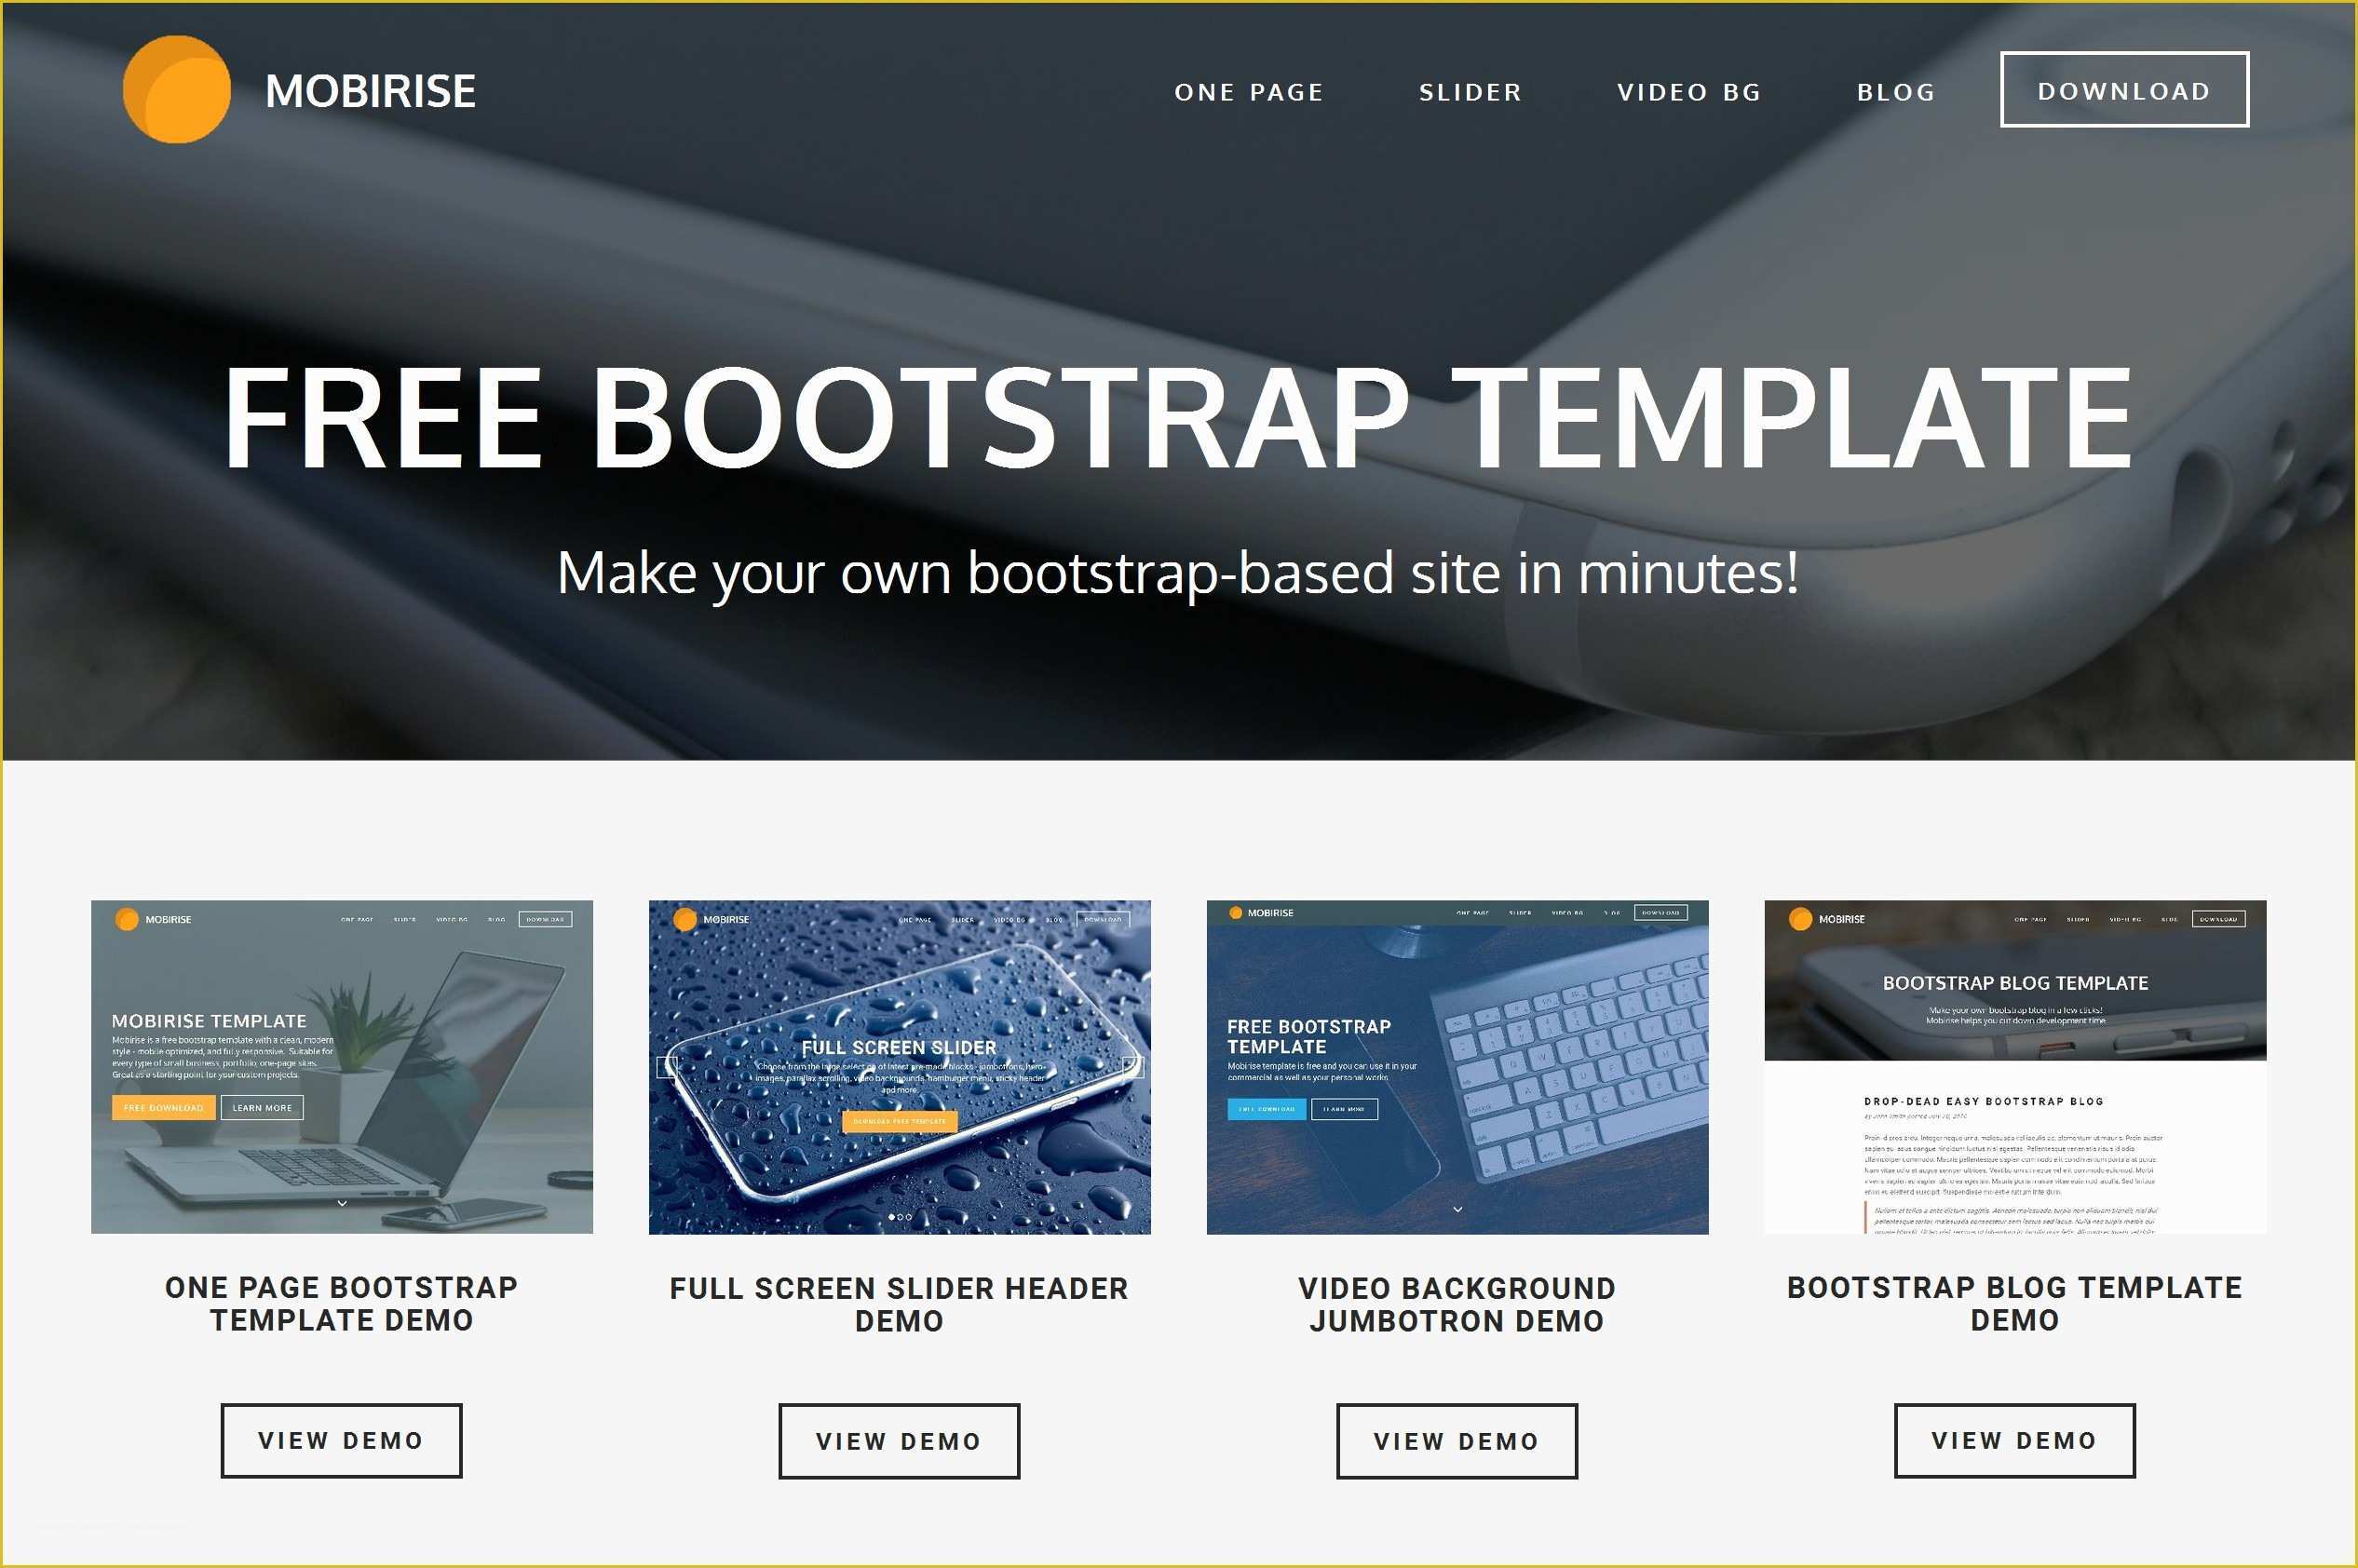 Free Online Website Templates Of Free Bootstrap Template for Mobile Friendly Websites